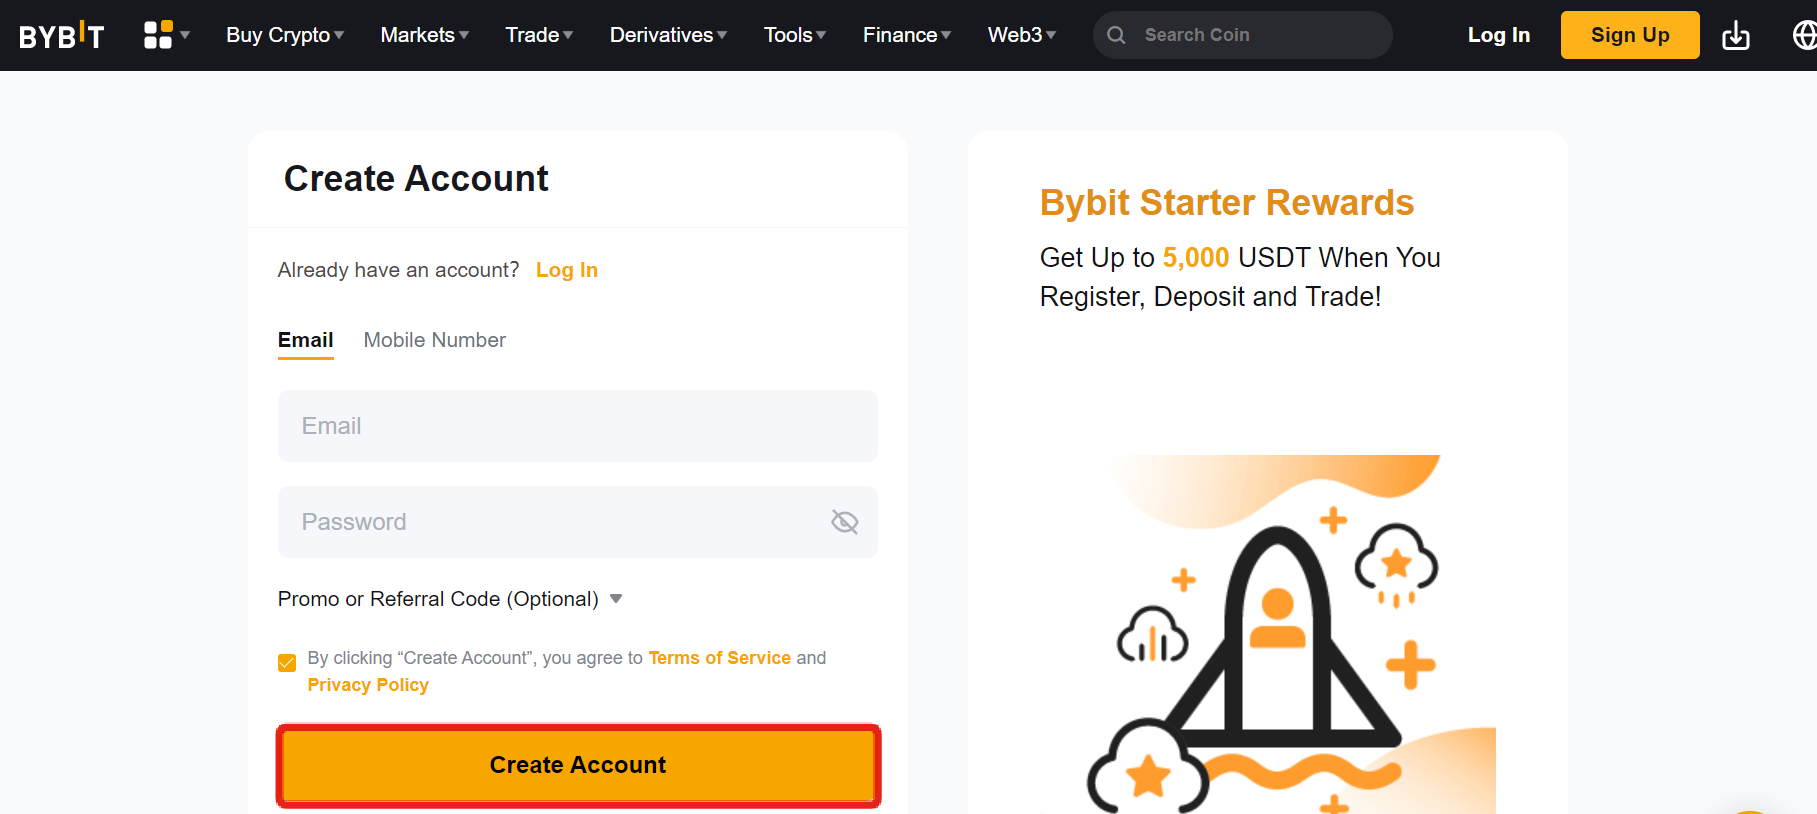 Bybit sign up page